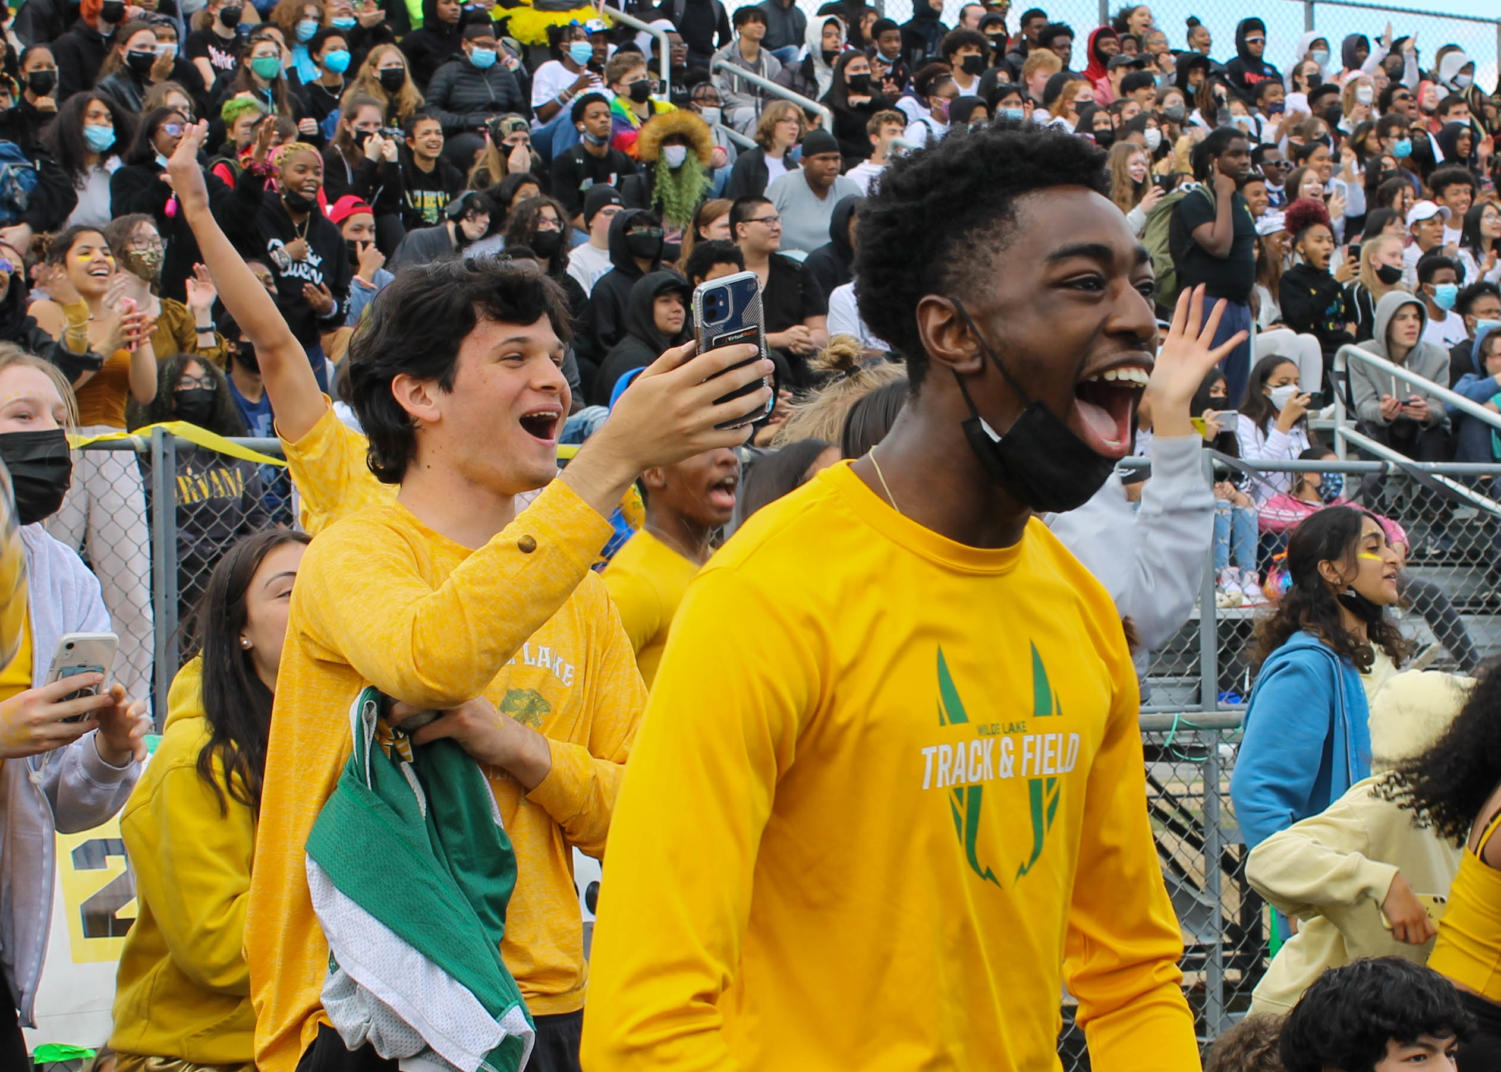 ‘I Felt Like a High Schooler, Again’ Student Says After Long-Delayed Pep Rally